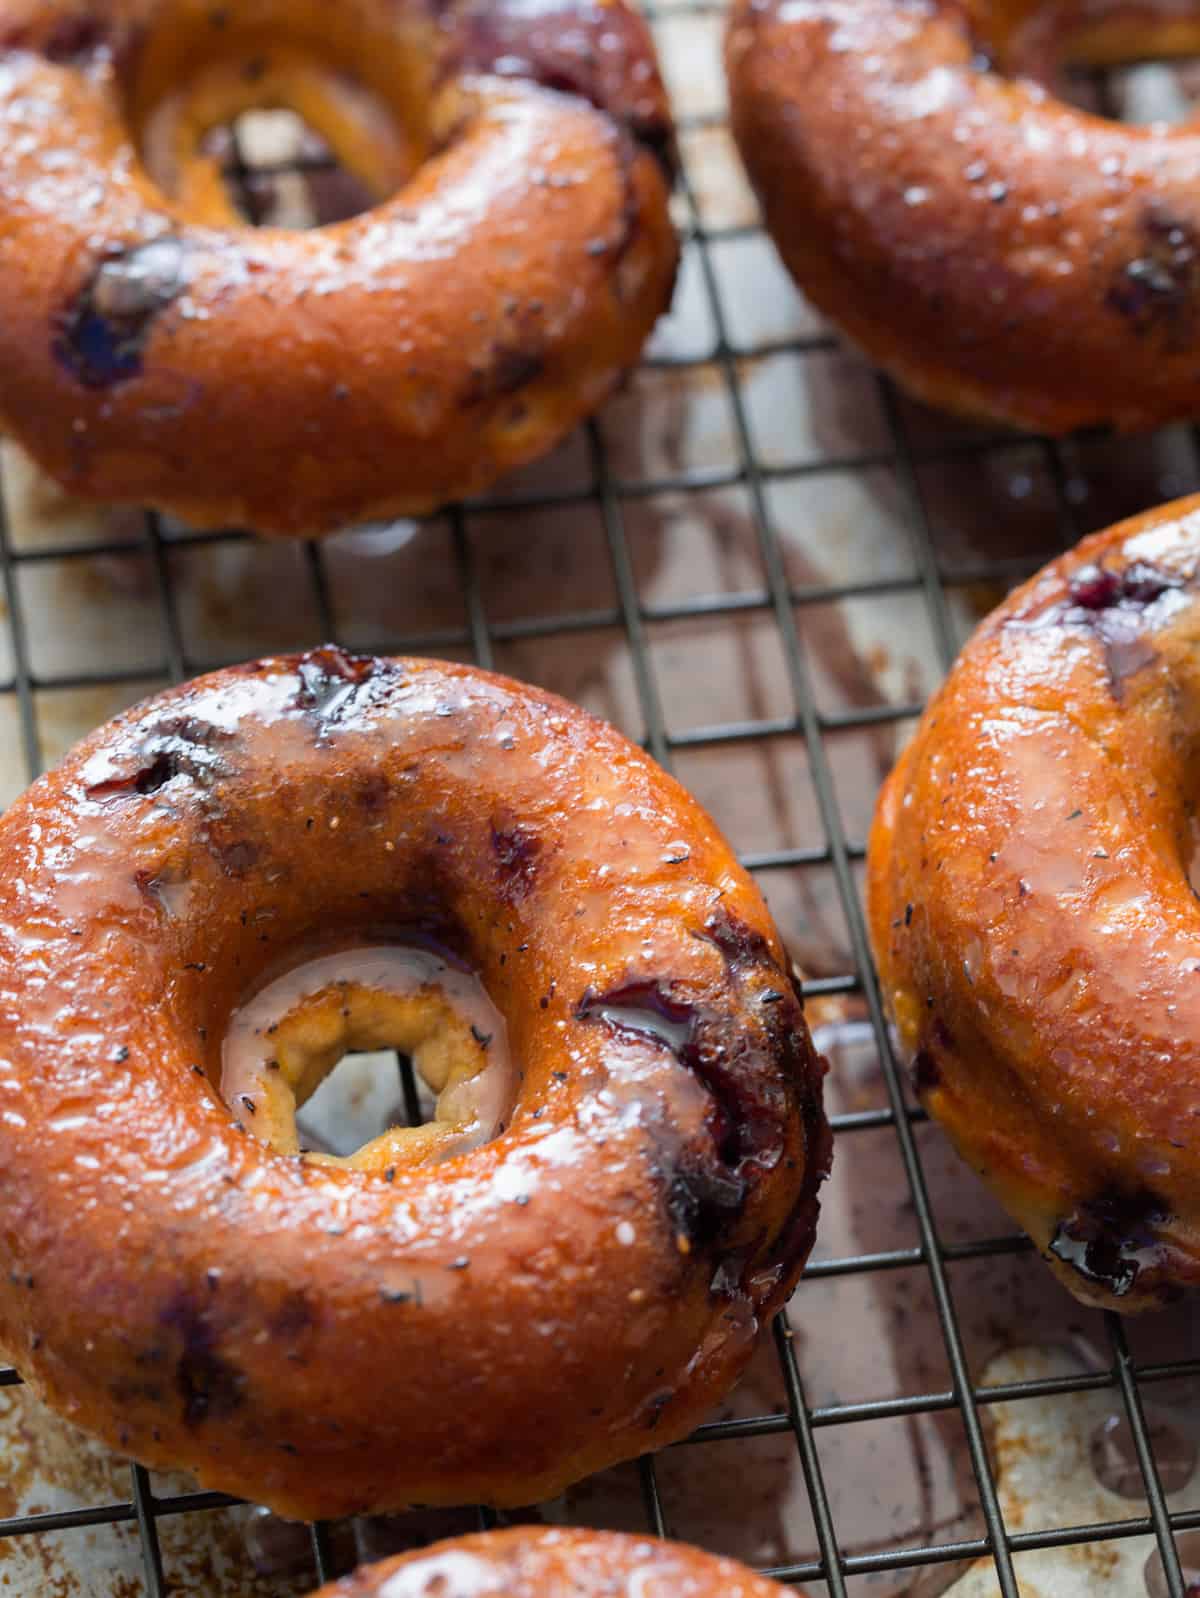 Baked blueberry donuts on a baking rack.